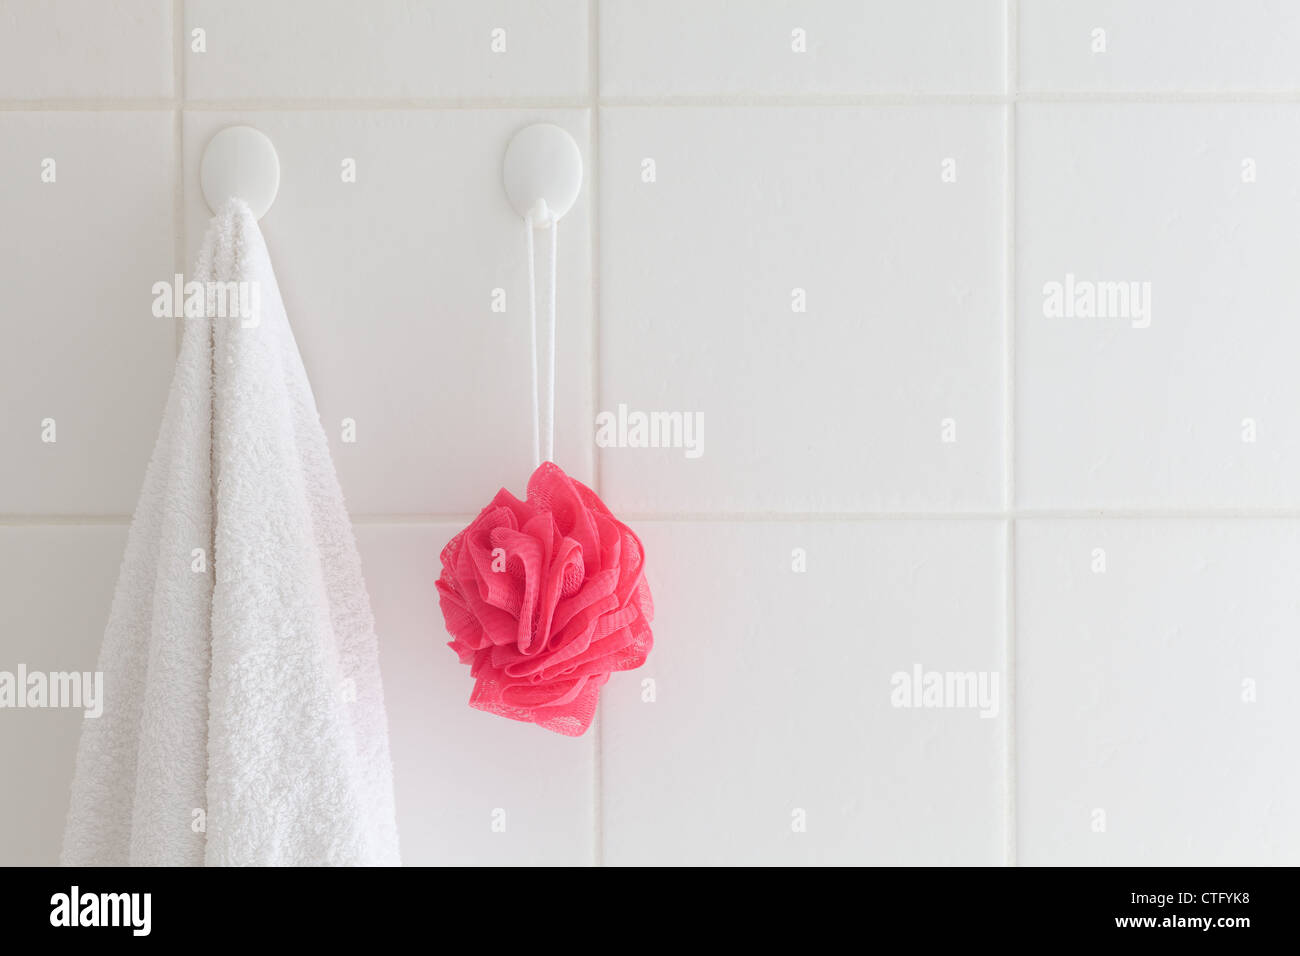 attached,bathroom,ceramic,clean,facecloth,grout,grouted,home,hooks,plastic,red,shower,square,strings,tiles,towel,wall,white Stock Photo